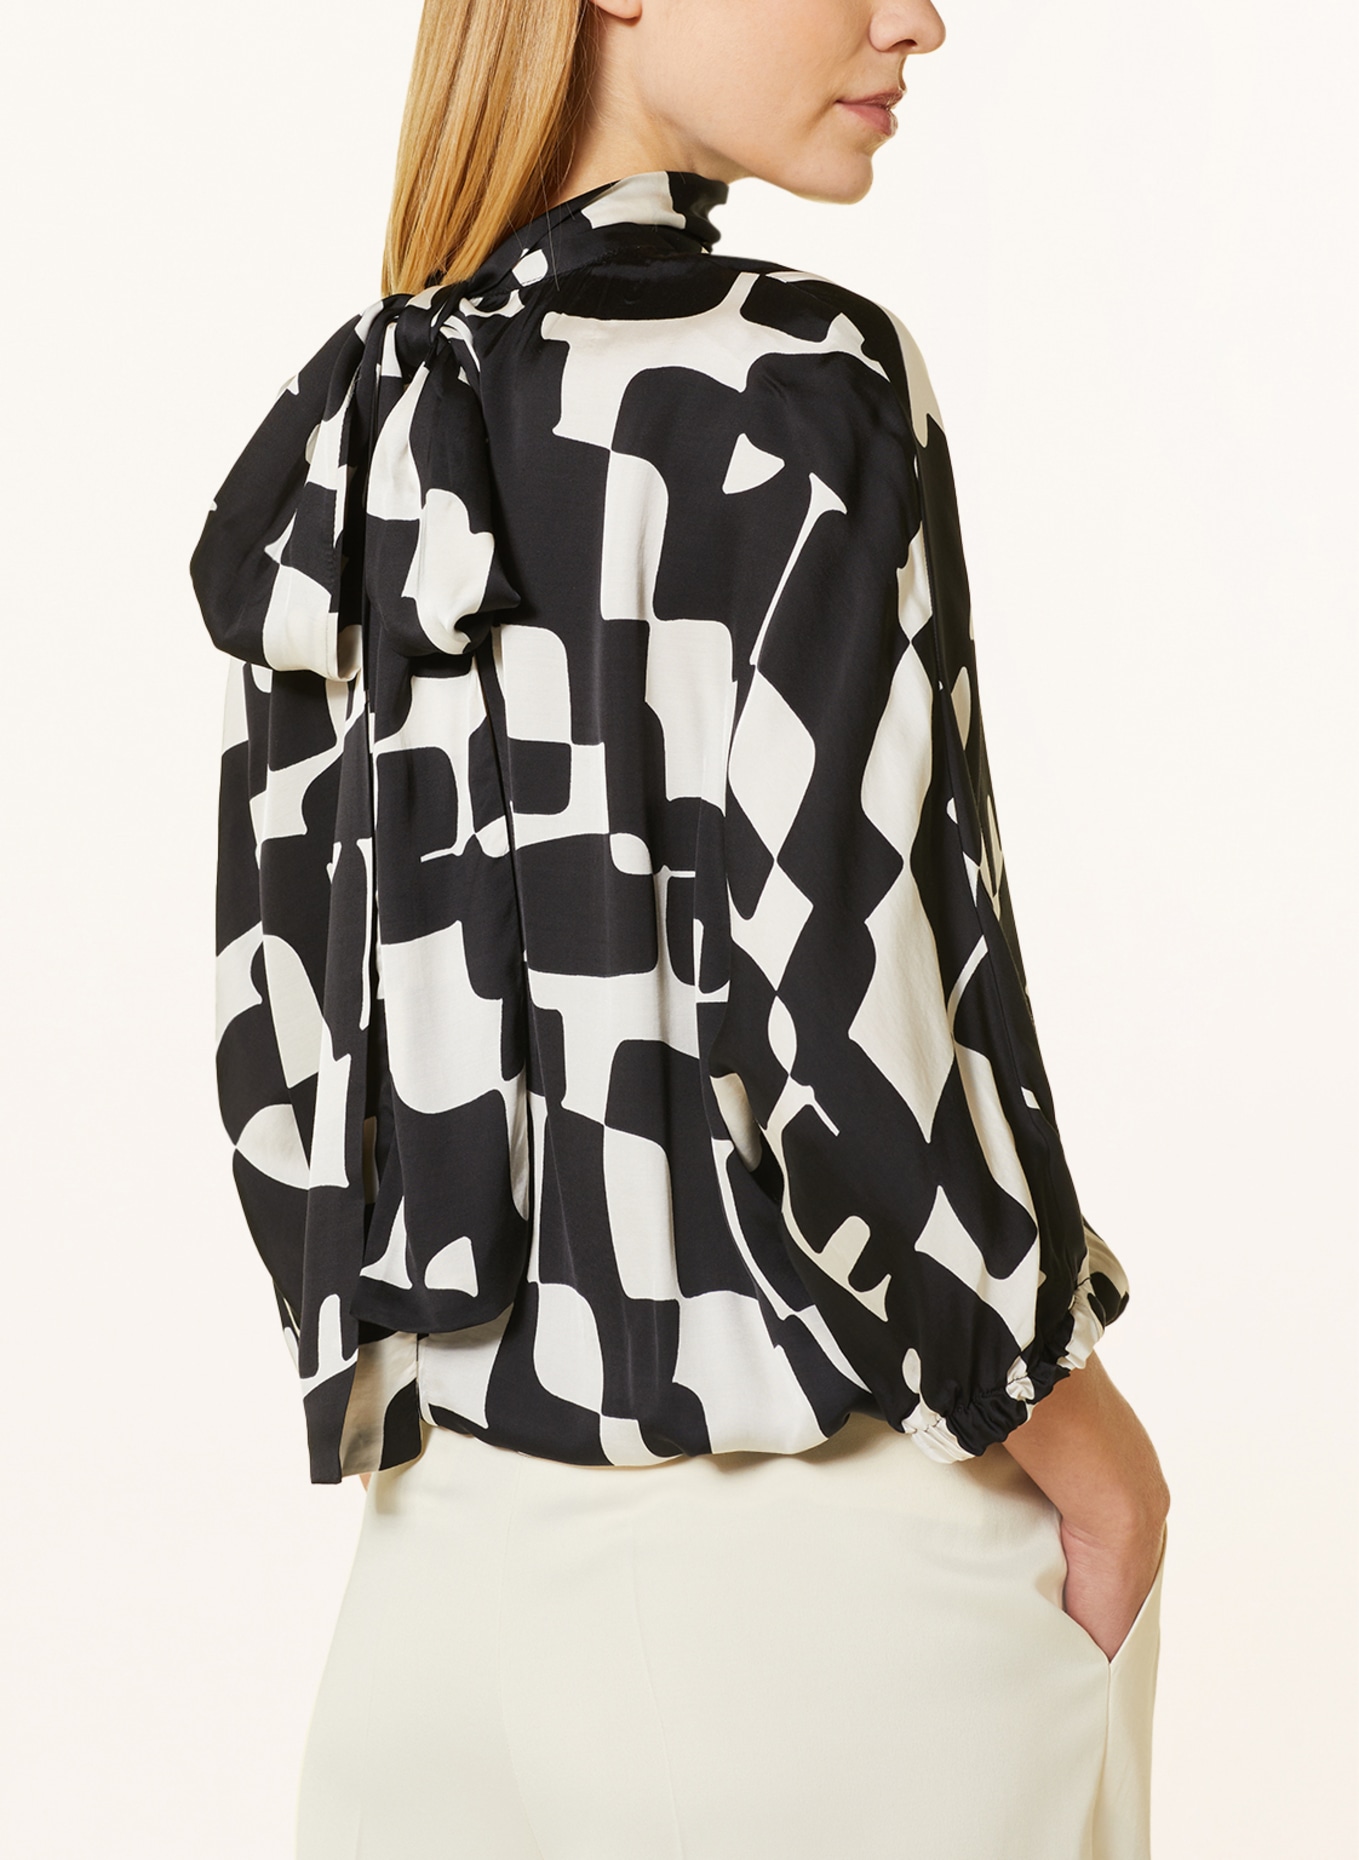 TONNO & PANNA Bow-tie blouse in satin with 3/4 sleeves, Color: BLACK/ WHITE (Image 4)